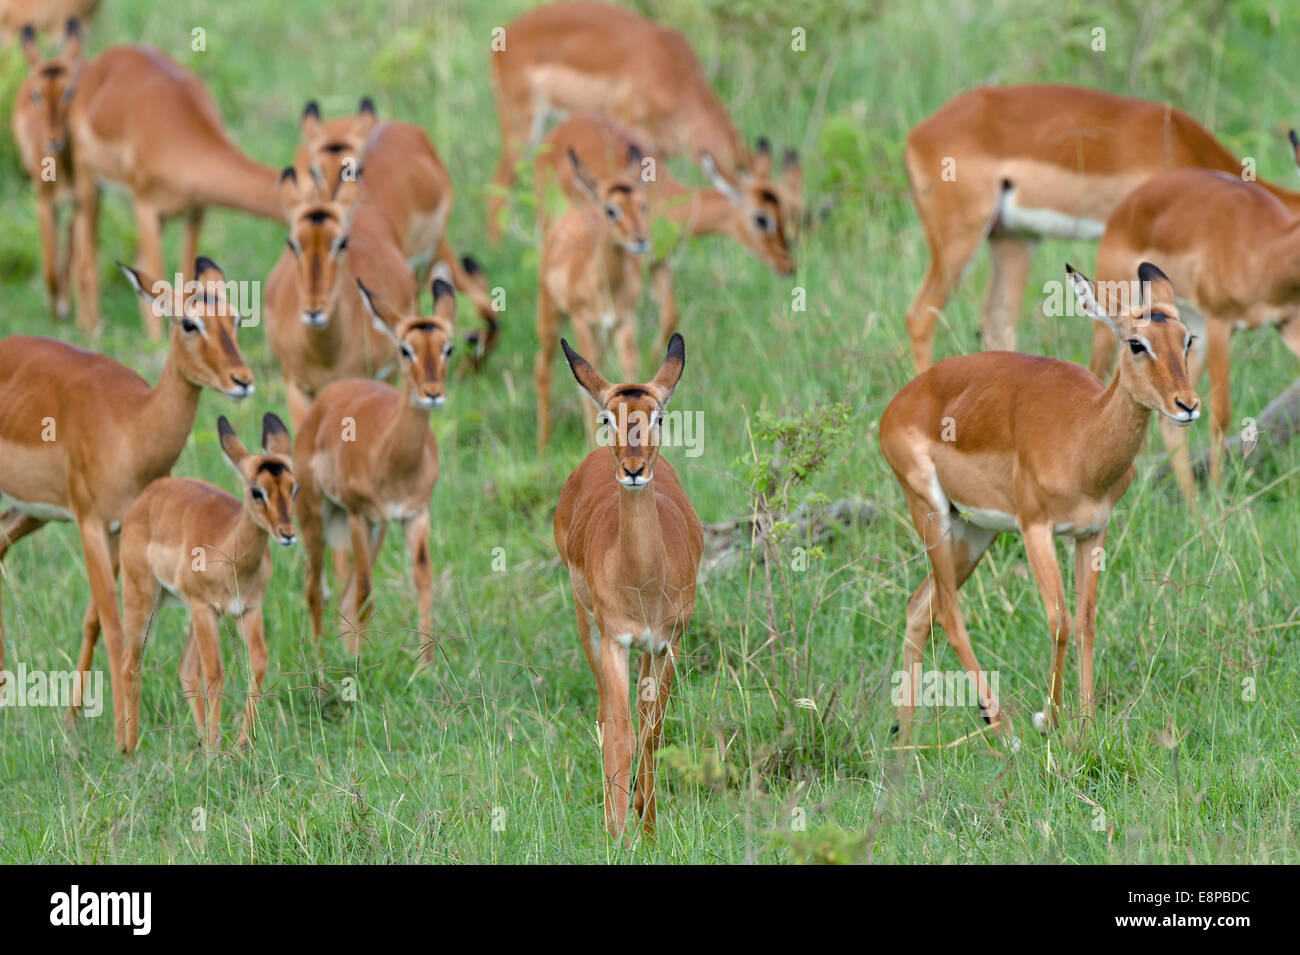 A herd of Impalas grazing in green grass Stock Photo